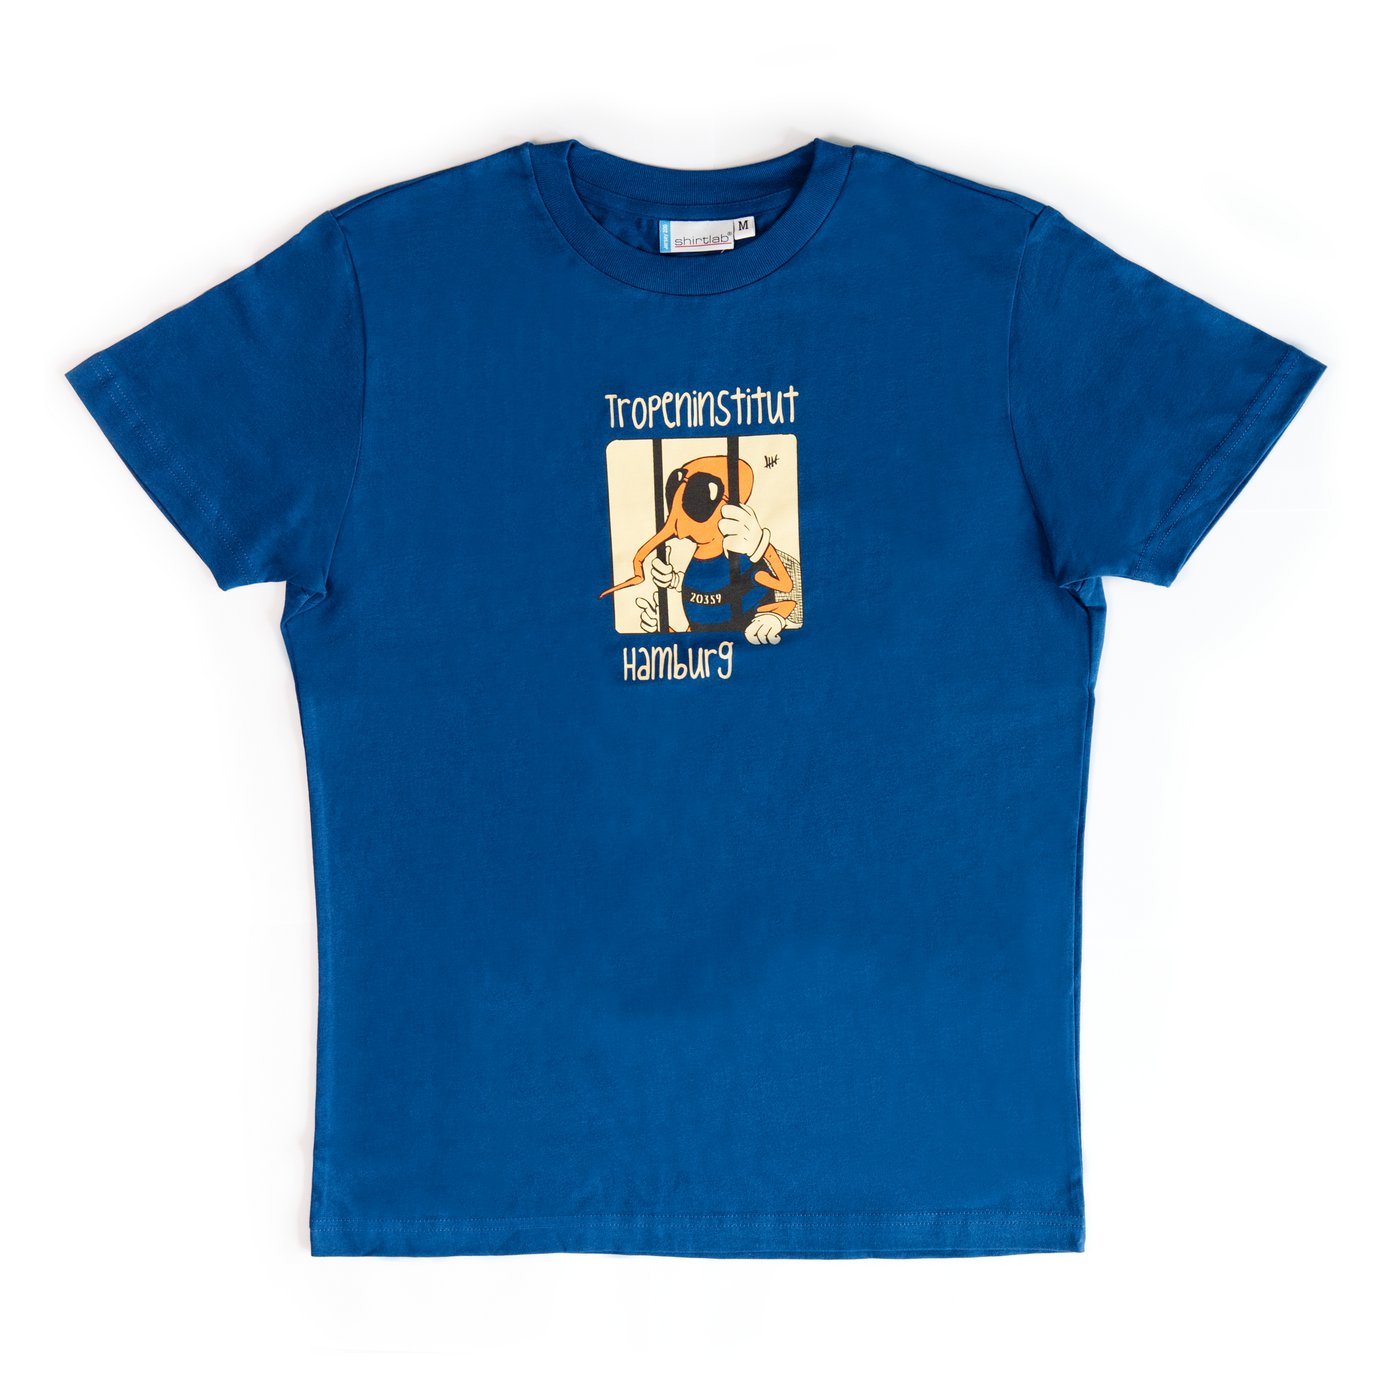 The image shows a blue T-shirt with a jail mosquito print.